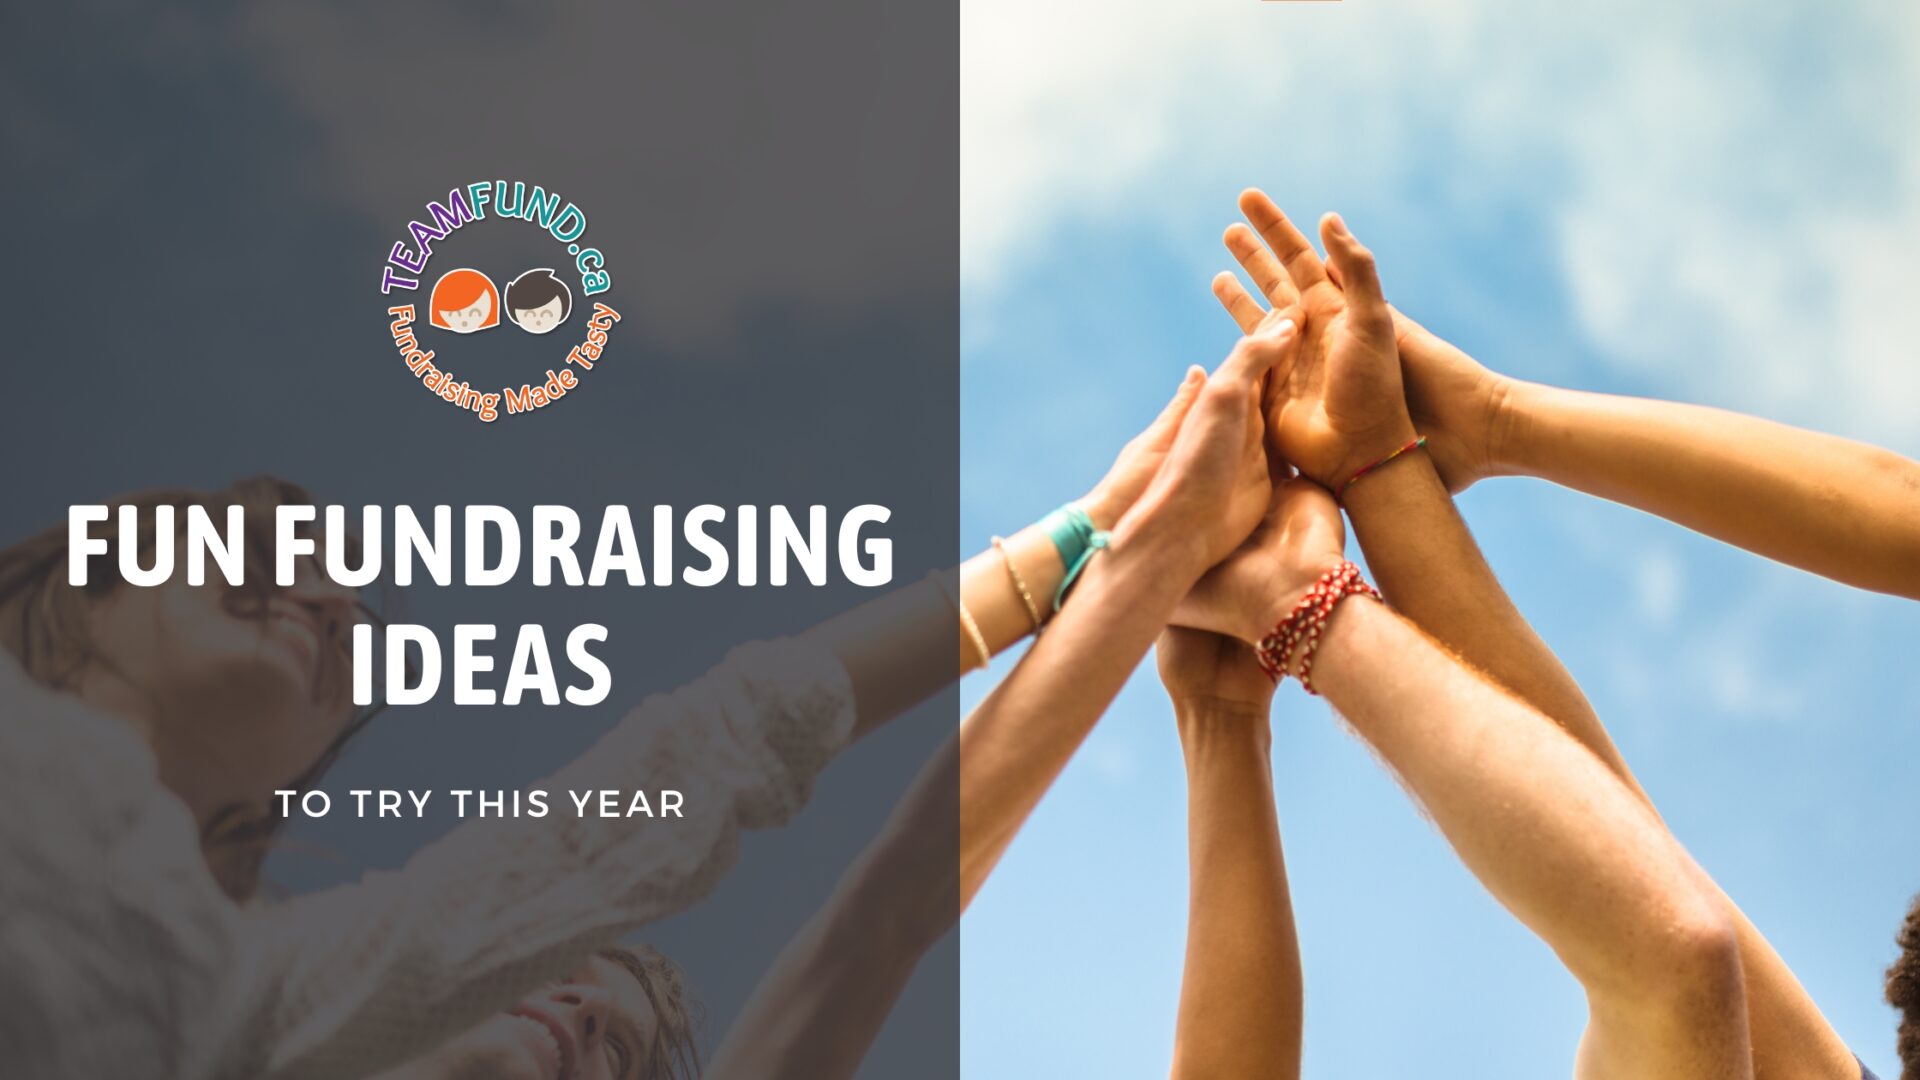 Fun Fundraising Ideas To Try This Year